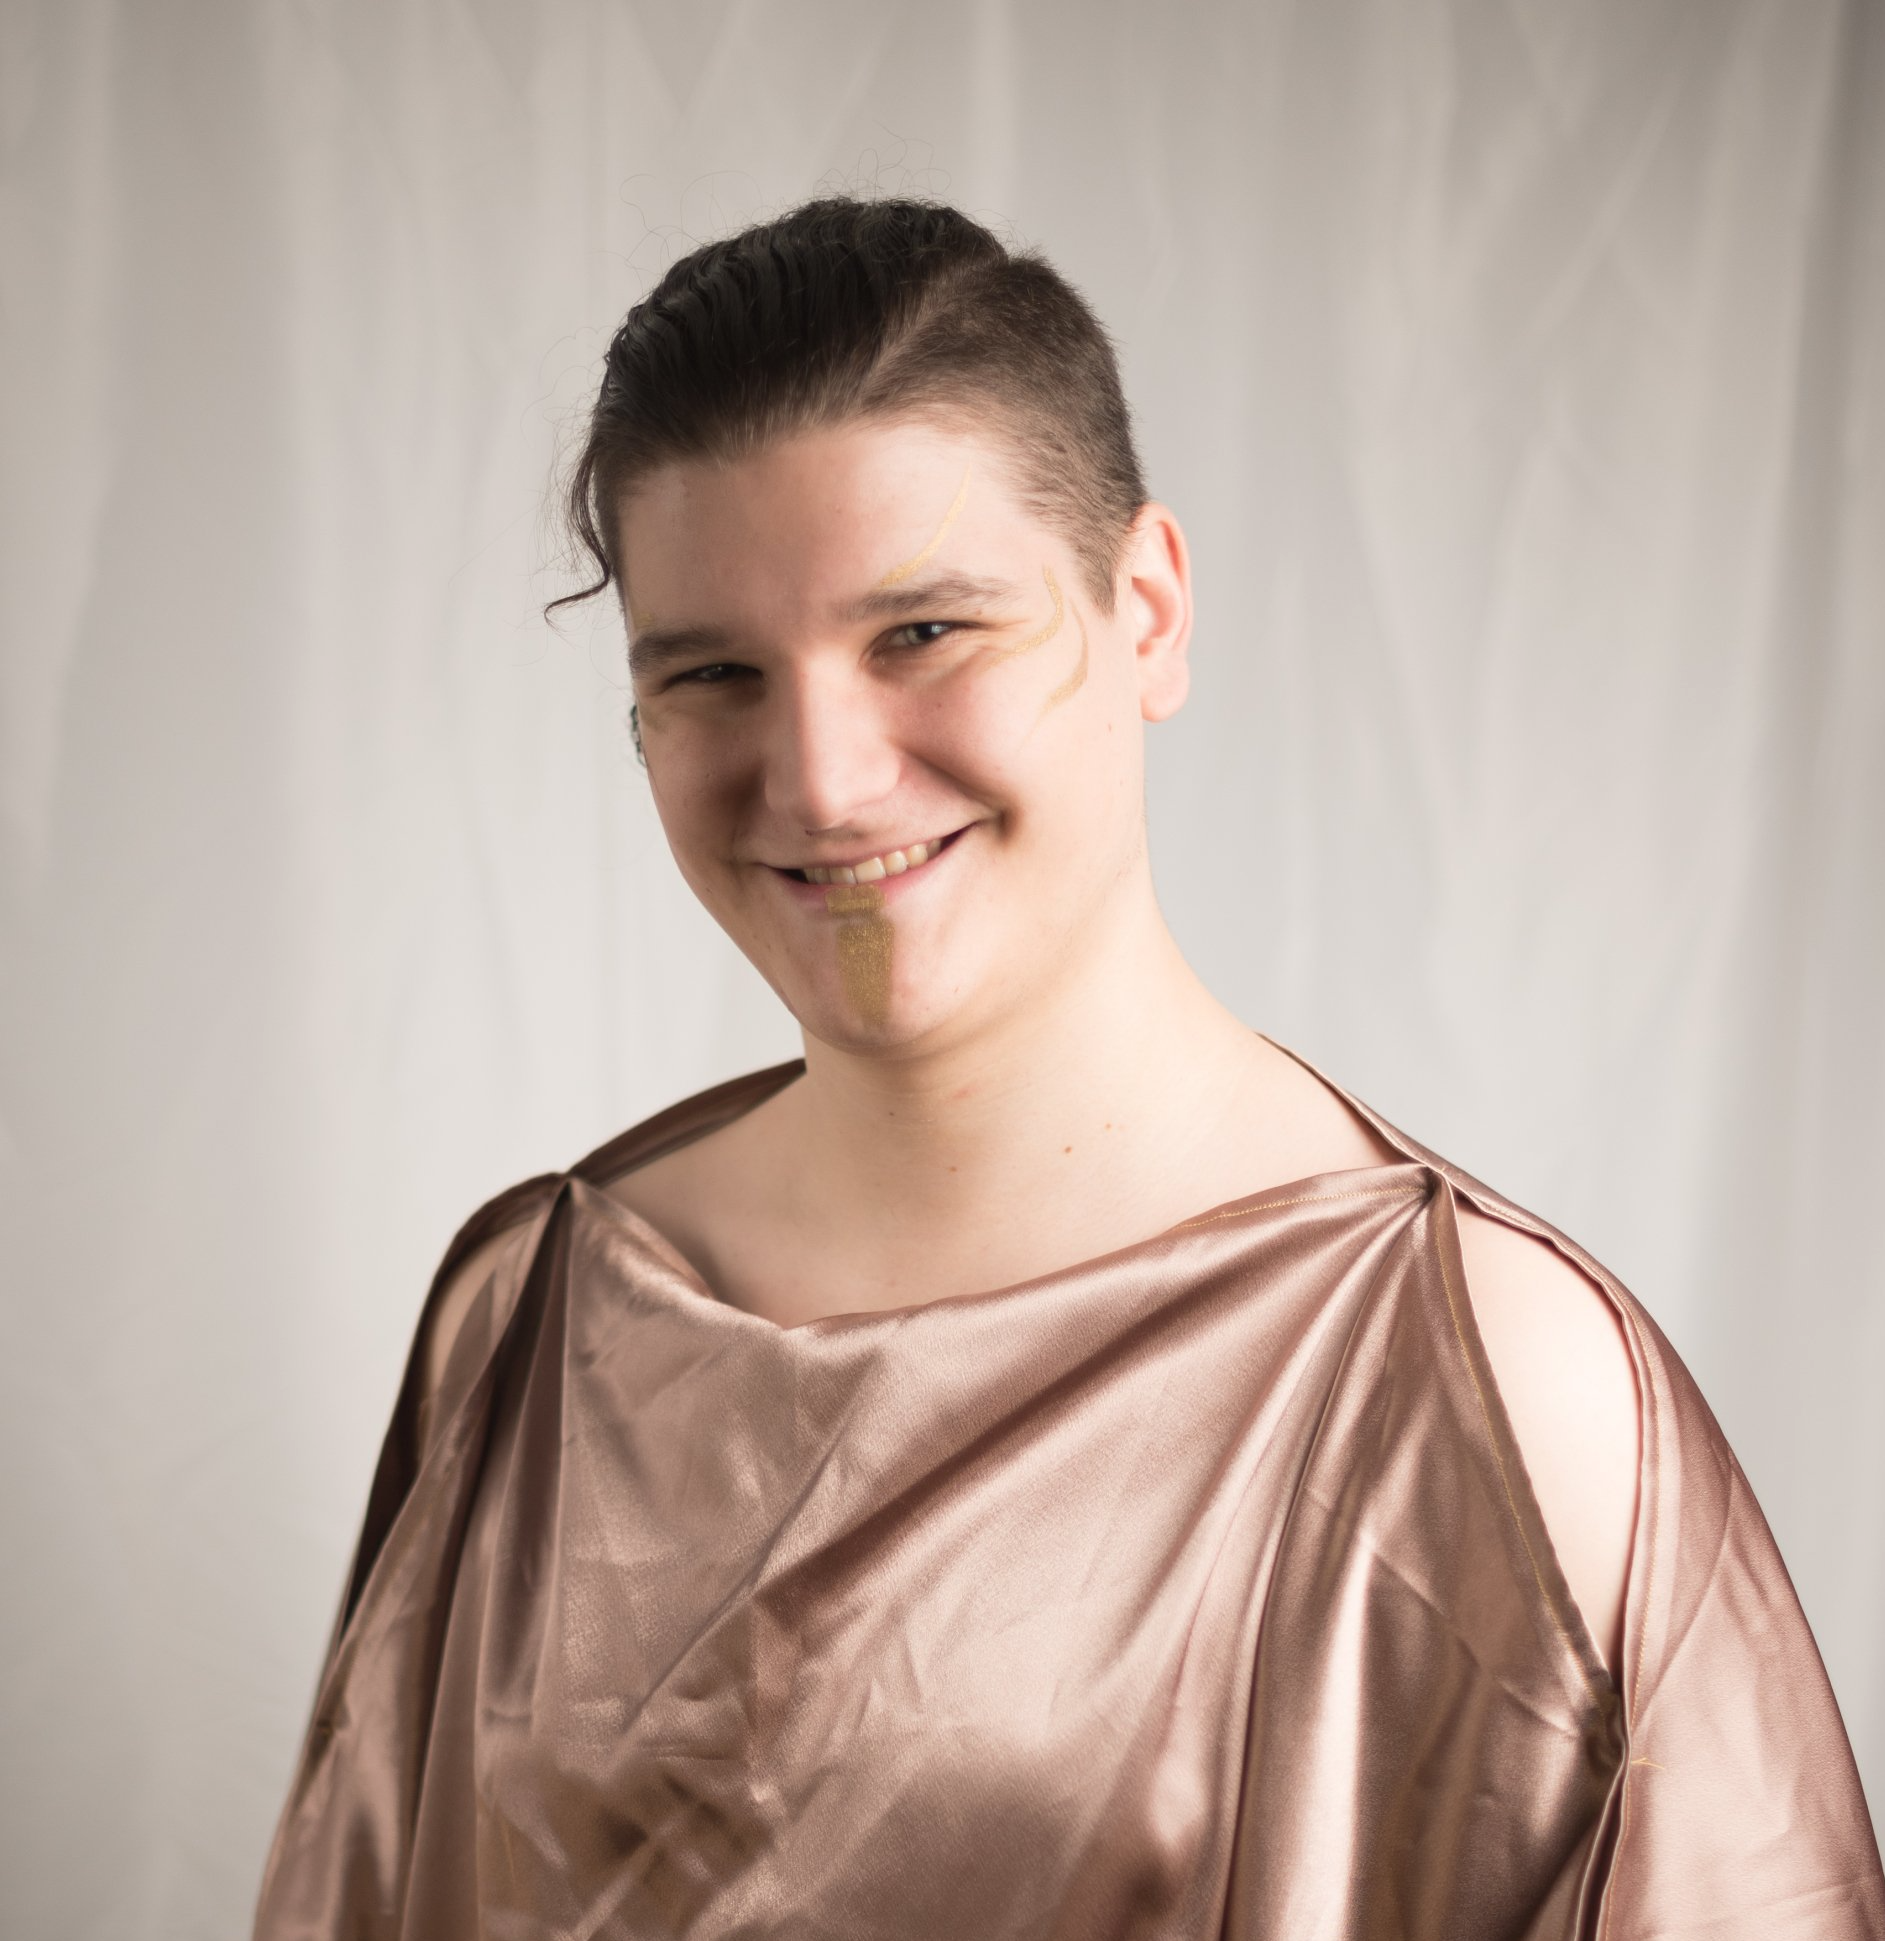 A young man wearing a brown satin toga smiling, representing Apollo.